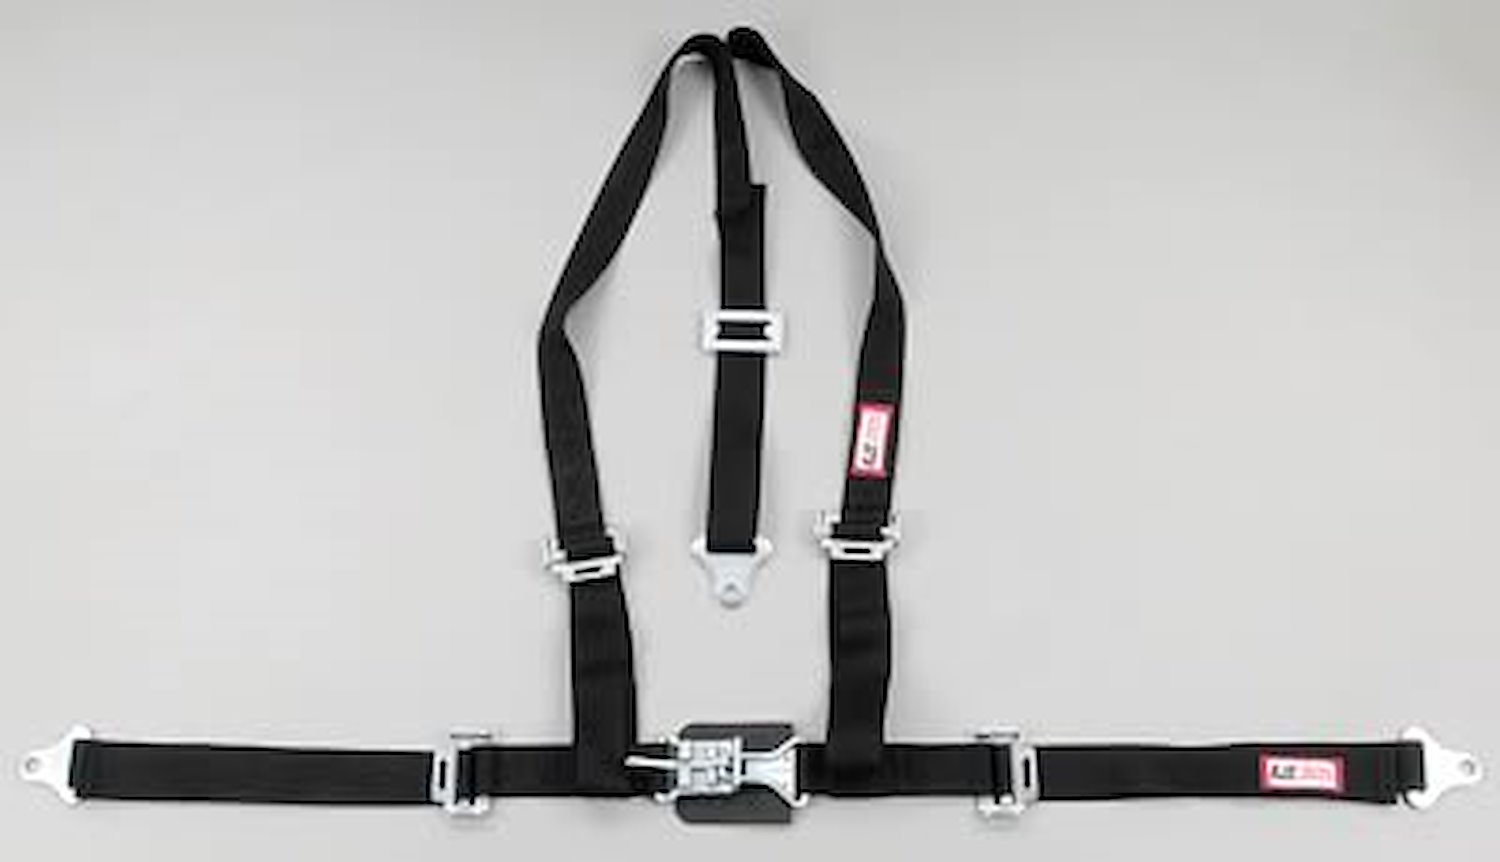 NON-SFI L&L HARNESS 2 PULL UP Lap Belt w/Adjuster 2 S.H. Y FLOOR MOUNT w/STERNUM STRAP ALL WRAP ENDS GRAY